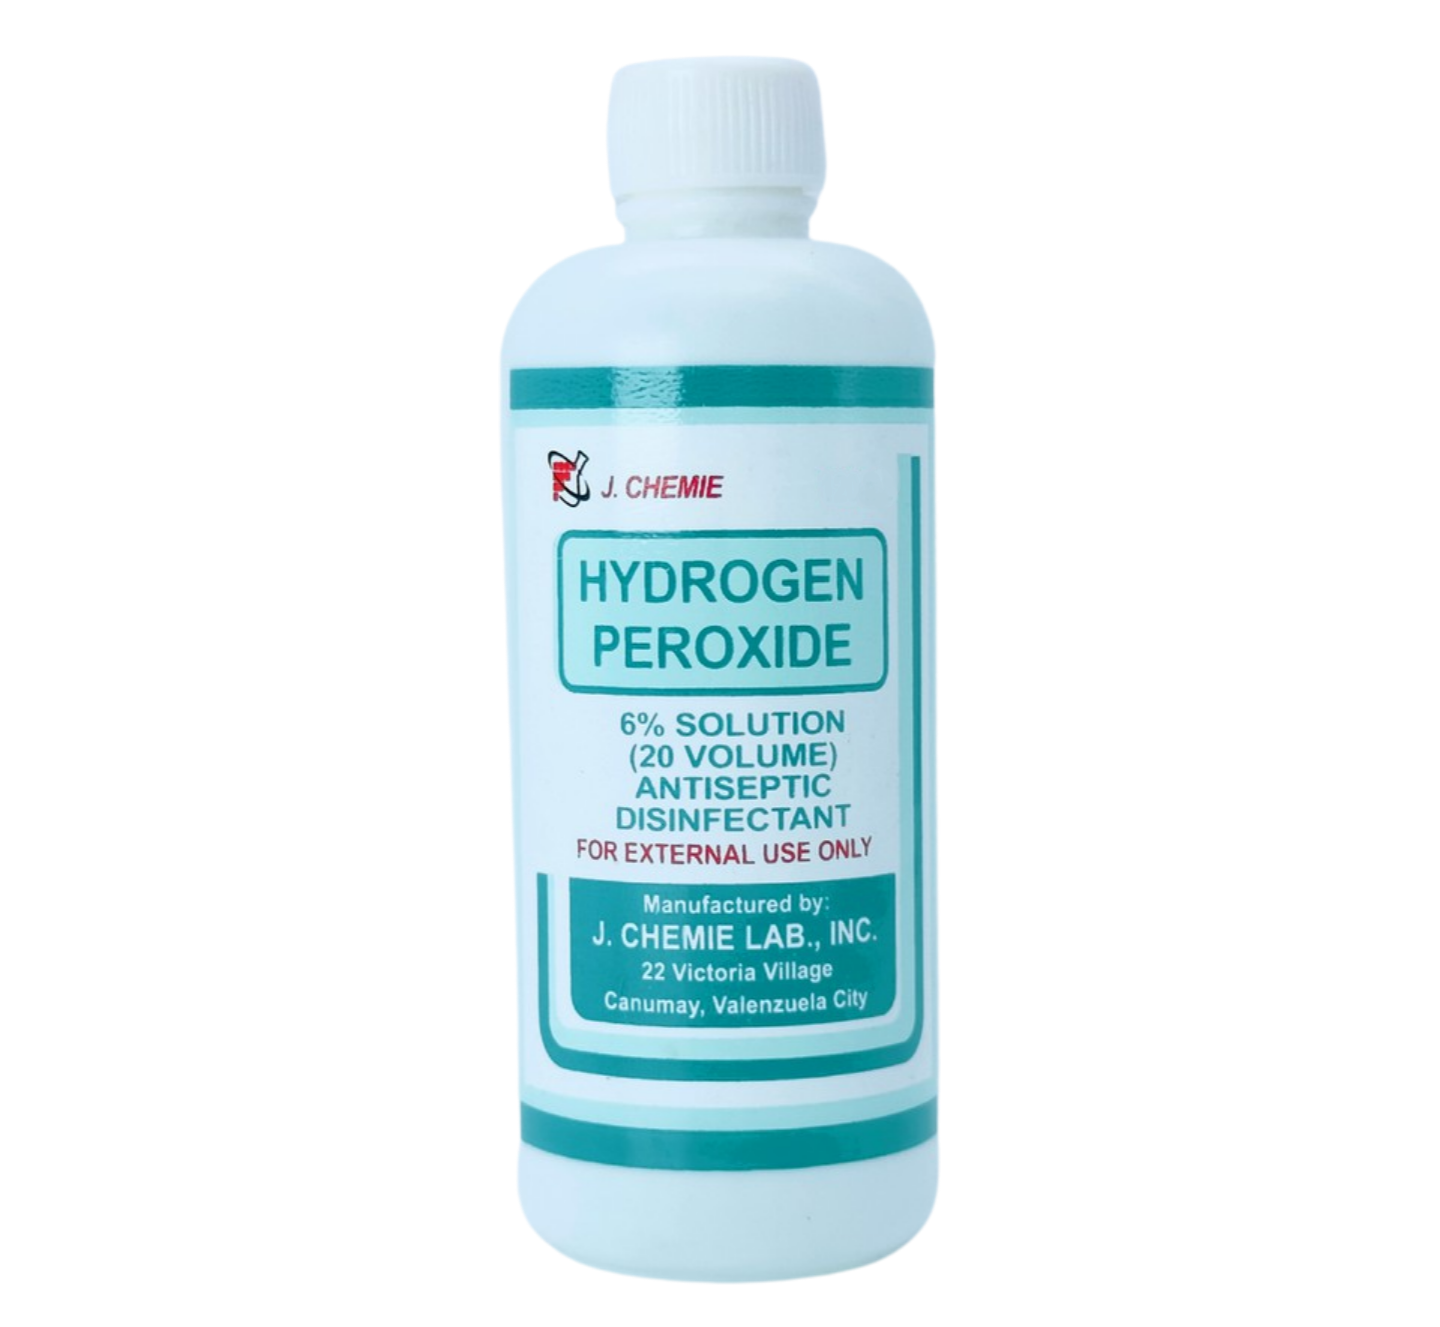 Buy J. chemie hydrogen peroxide 20vol 6% solution 60ml online with MedsGo.  Price - from